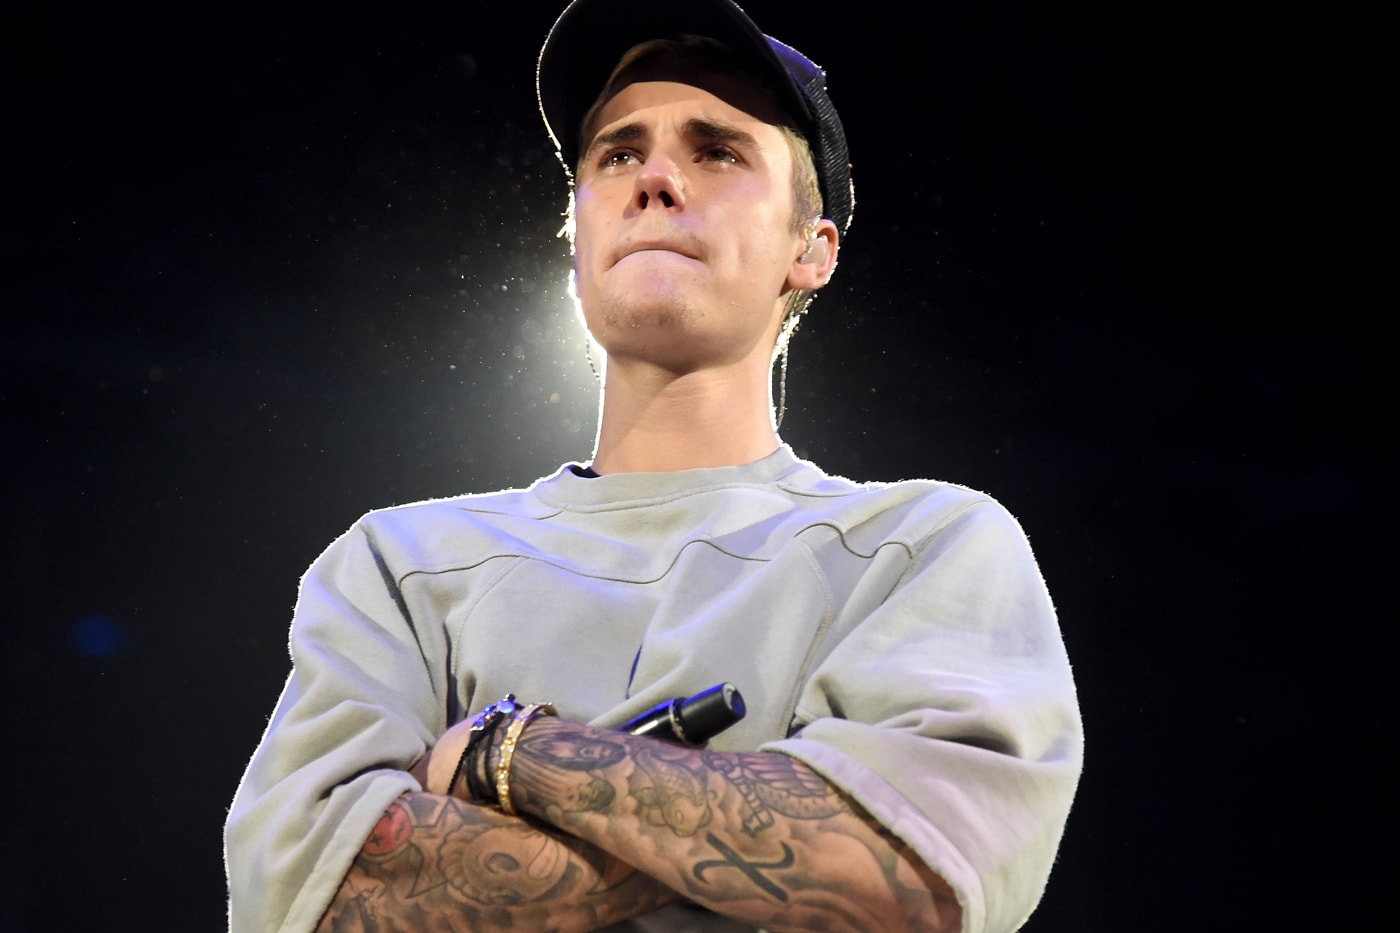 justin-bieber-under-investigation-for-attempted-robbery